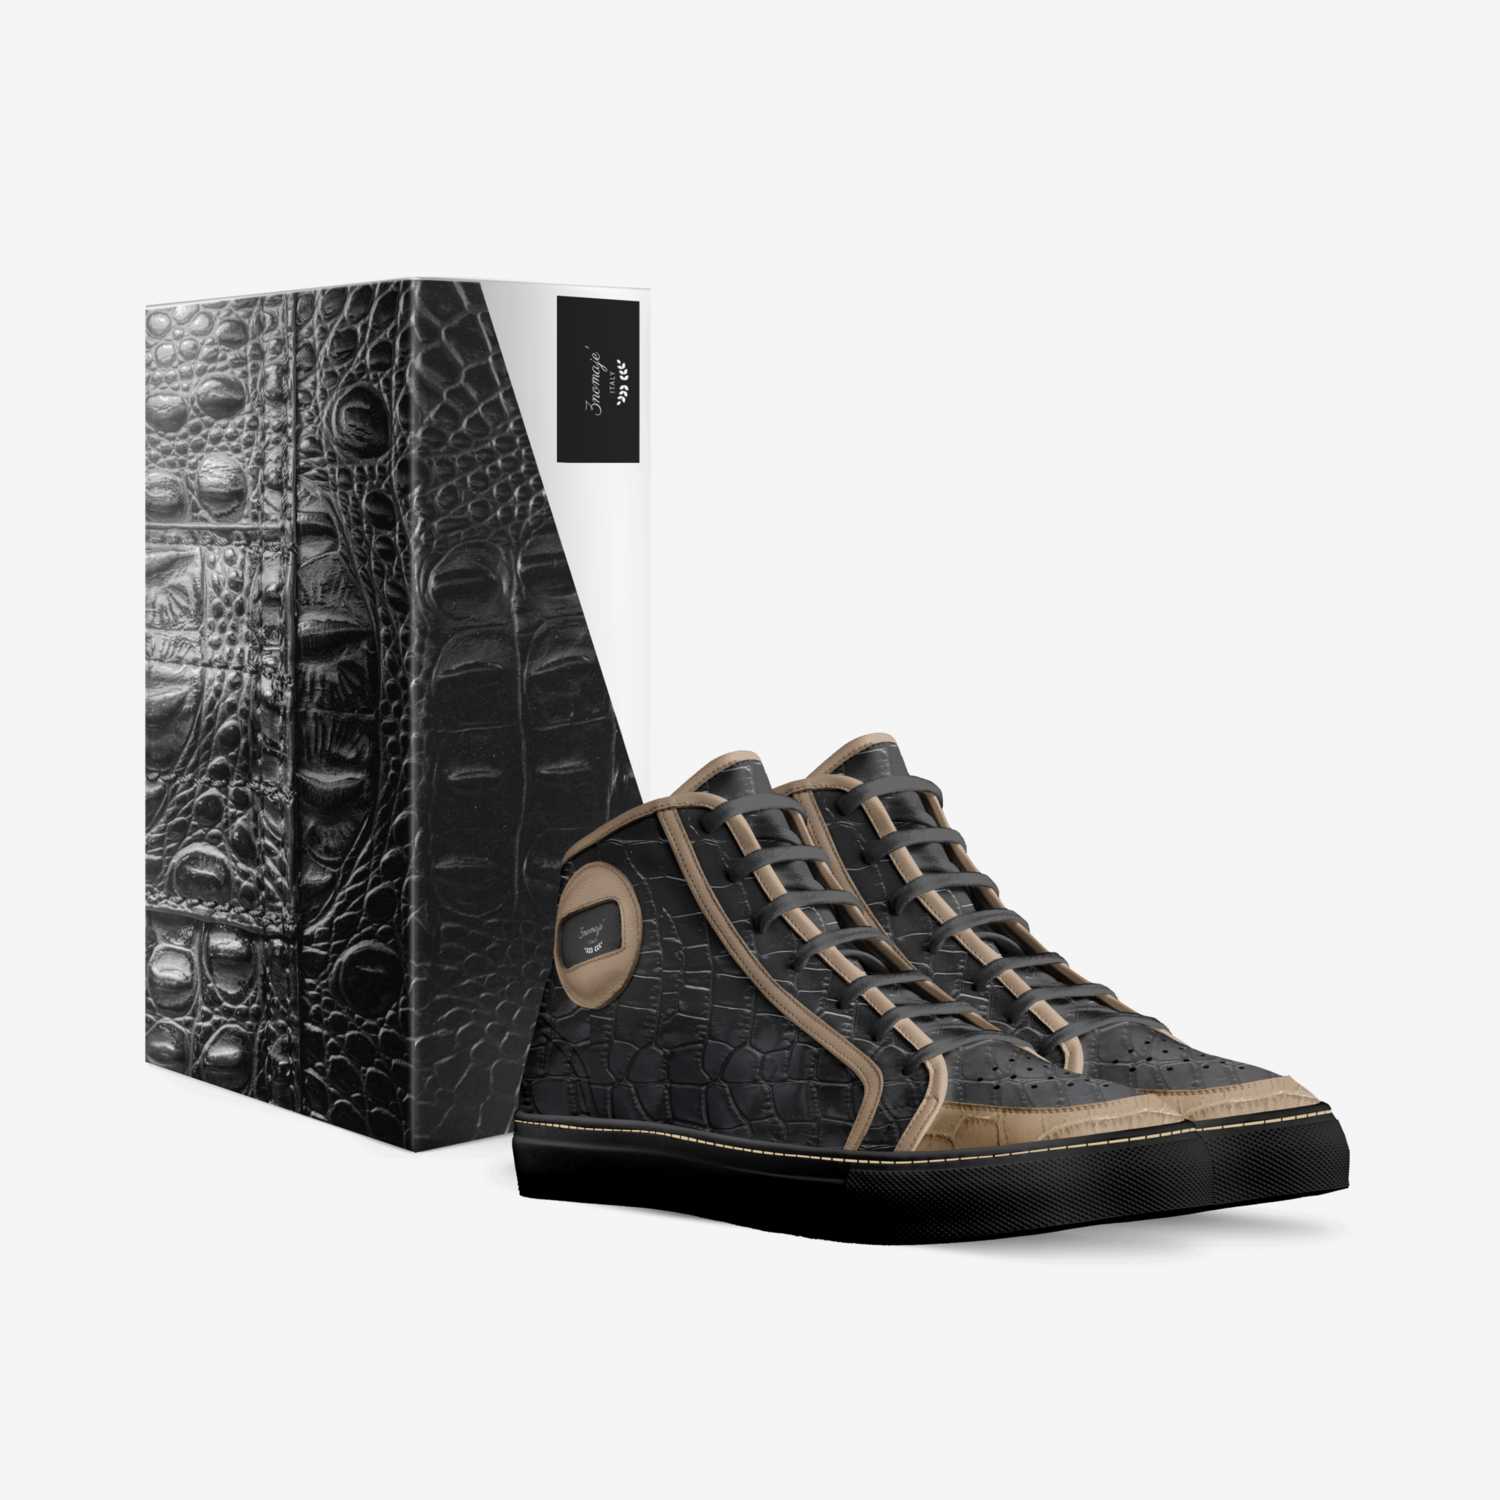 enomaje' custom made in Italy shoes by Jamal Reese | Box view